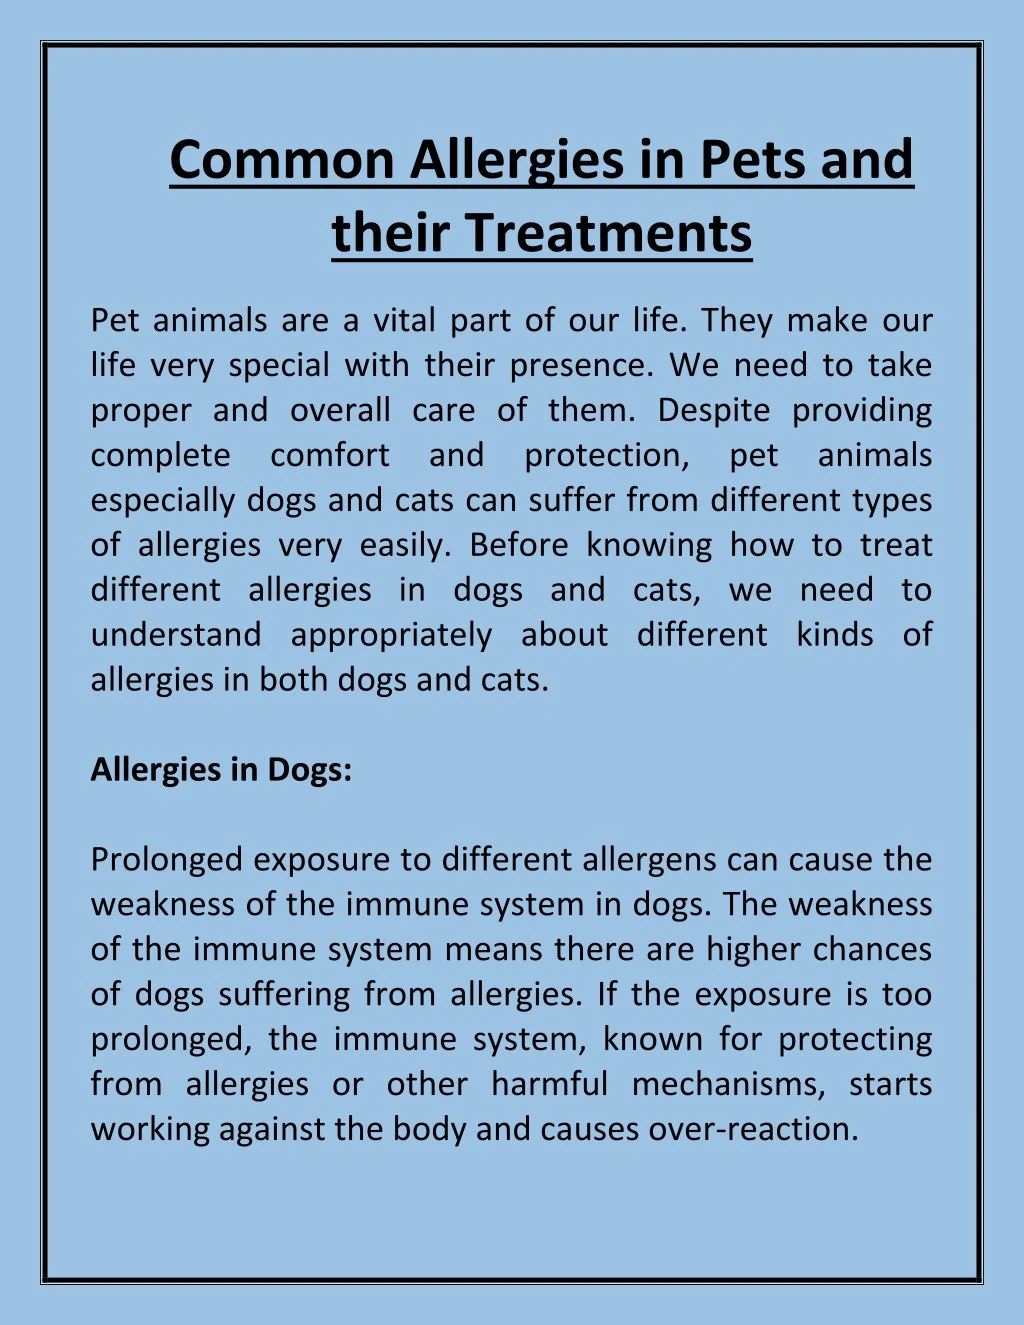 common allergies in pets and their treatments